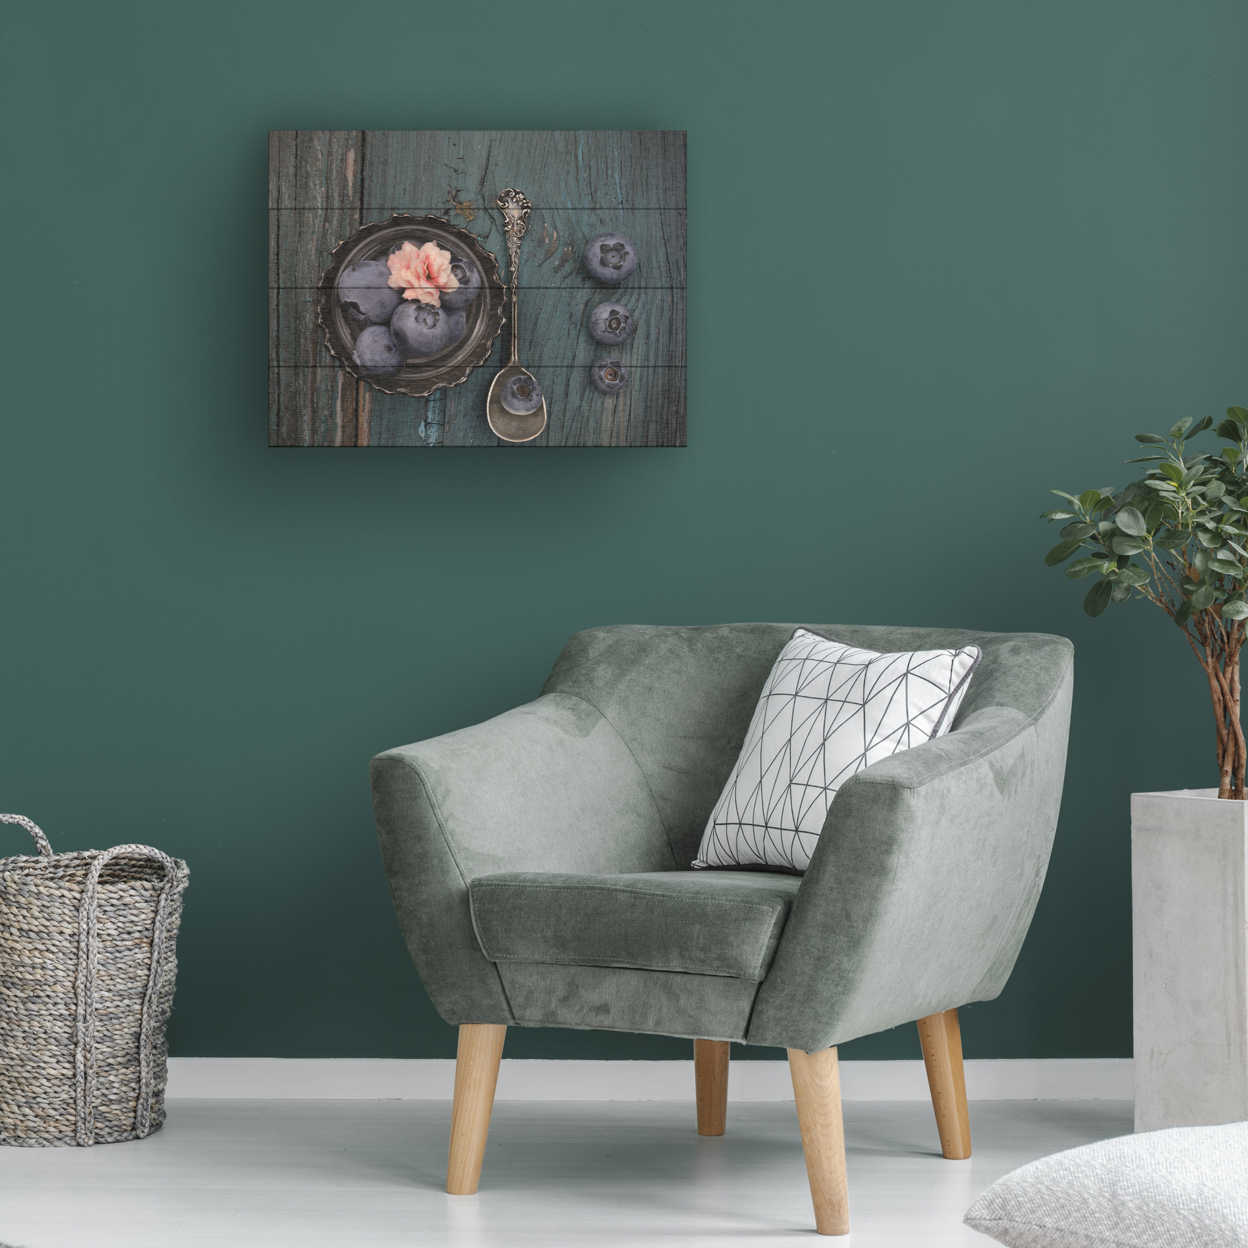 Wall Art 12 X 16 Inches Titled Pretty Blueberry Ready To Hang Printed On Wooden Planks